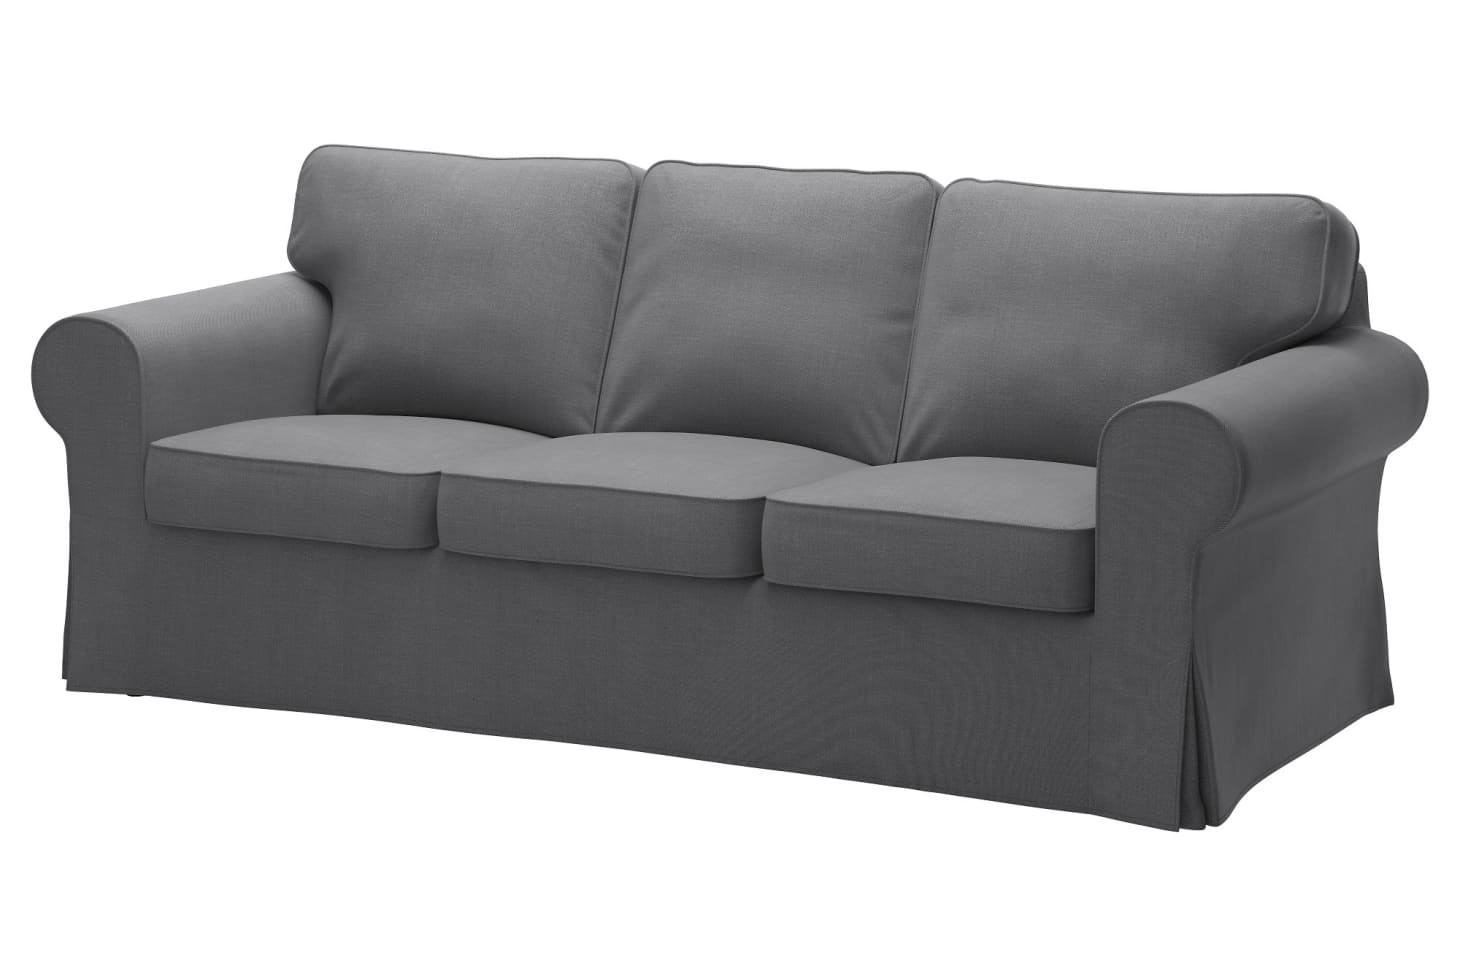 The Best & Most Comfortable IKEA Sofas Apartment Therapy